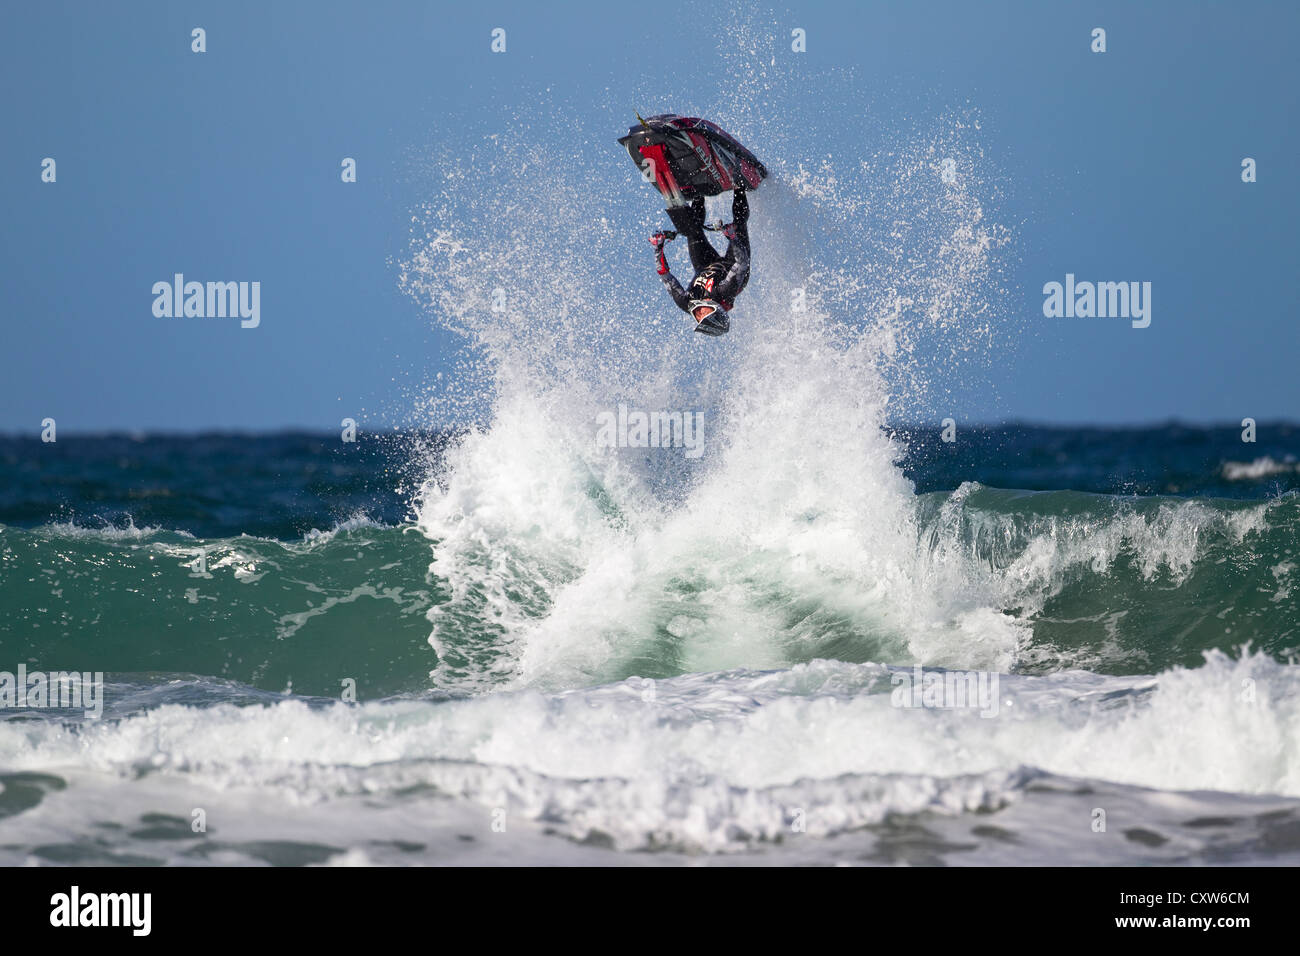 Freeriding Jetski doing an inverted jump off a wave at Fistral Beach in Newquay, Cornwall, UK Stock Photo